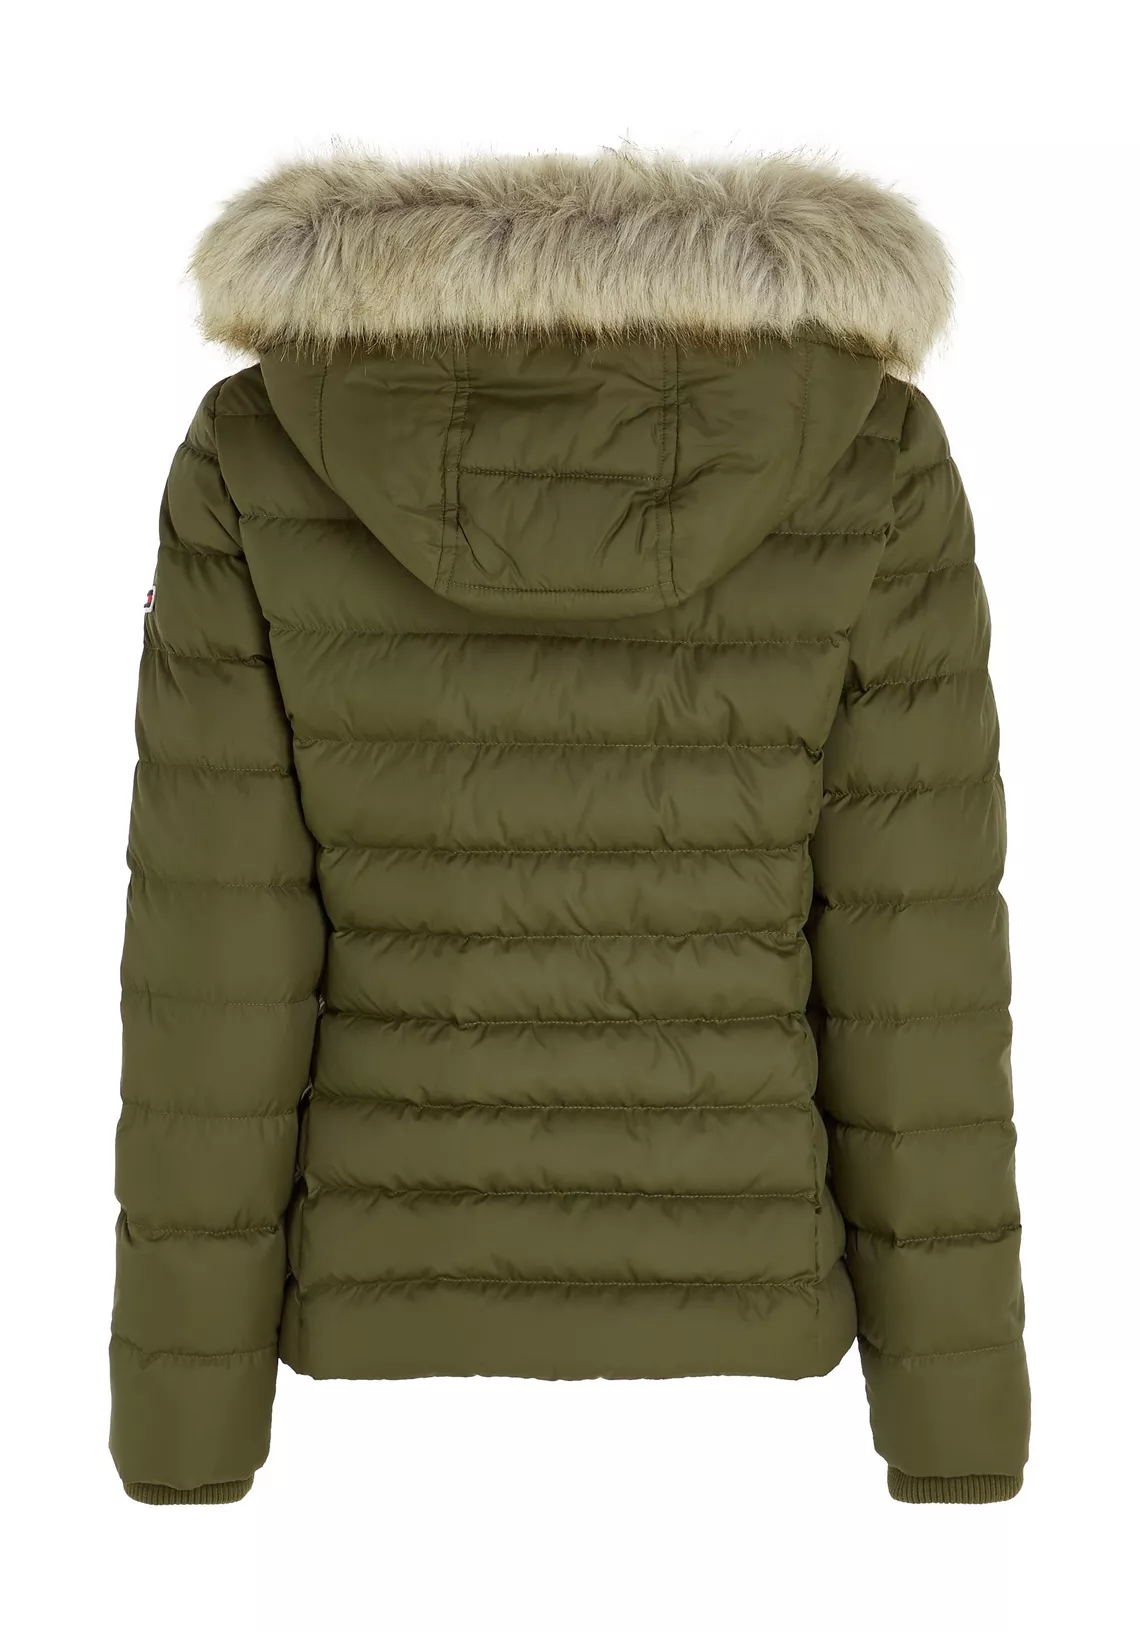 Tommy Hilfiger Basic Hooded Winter Coat Women, Army Green